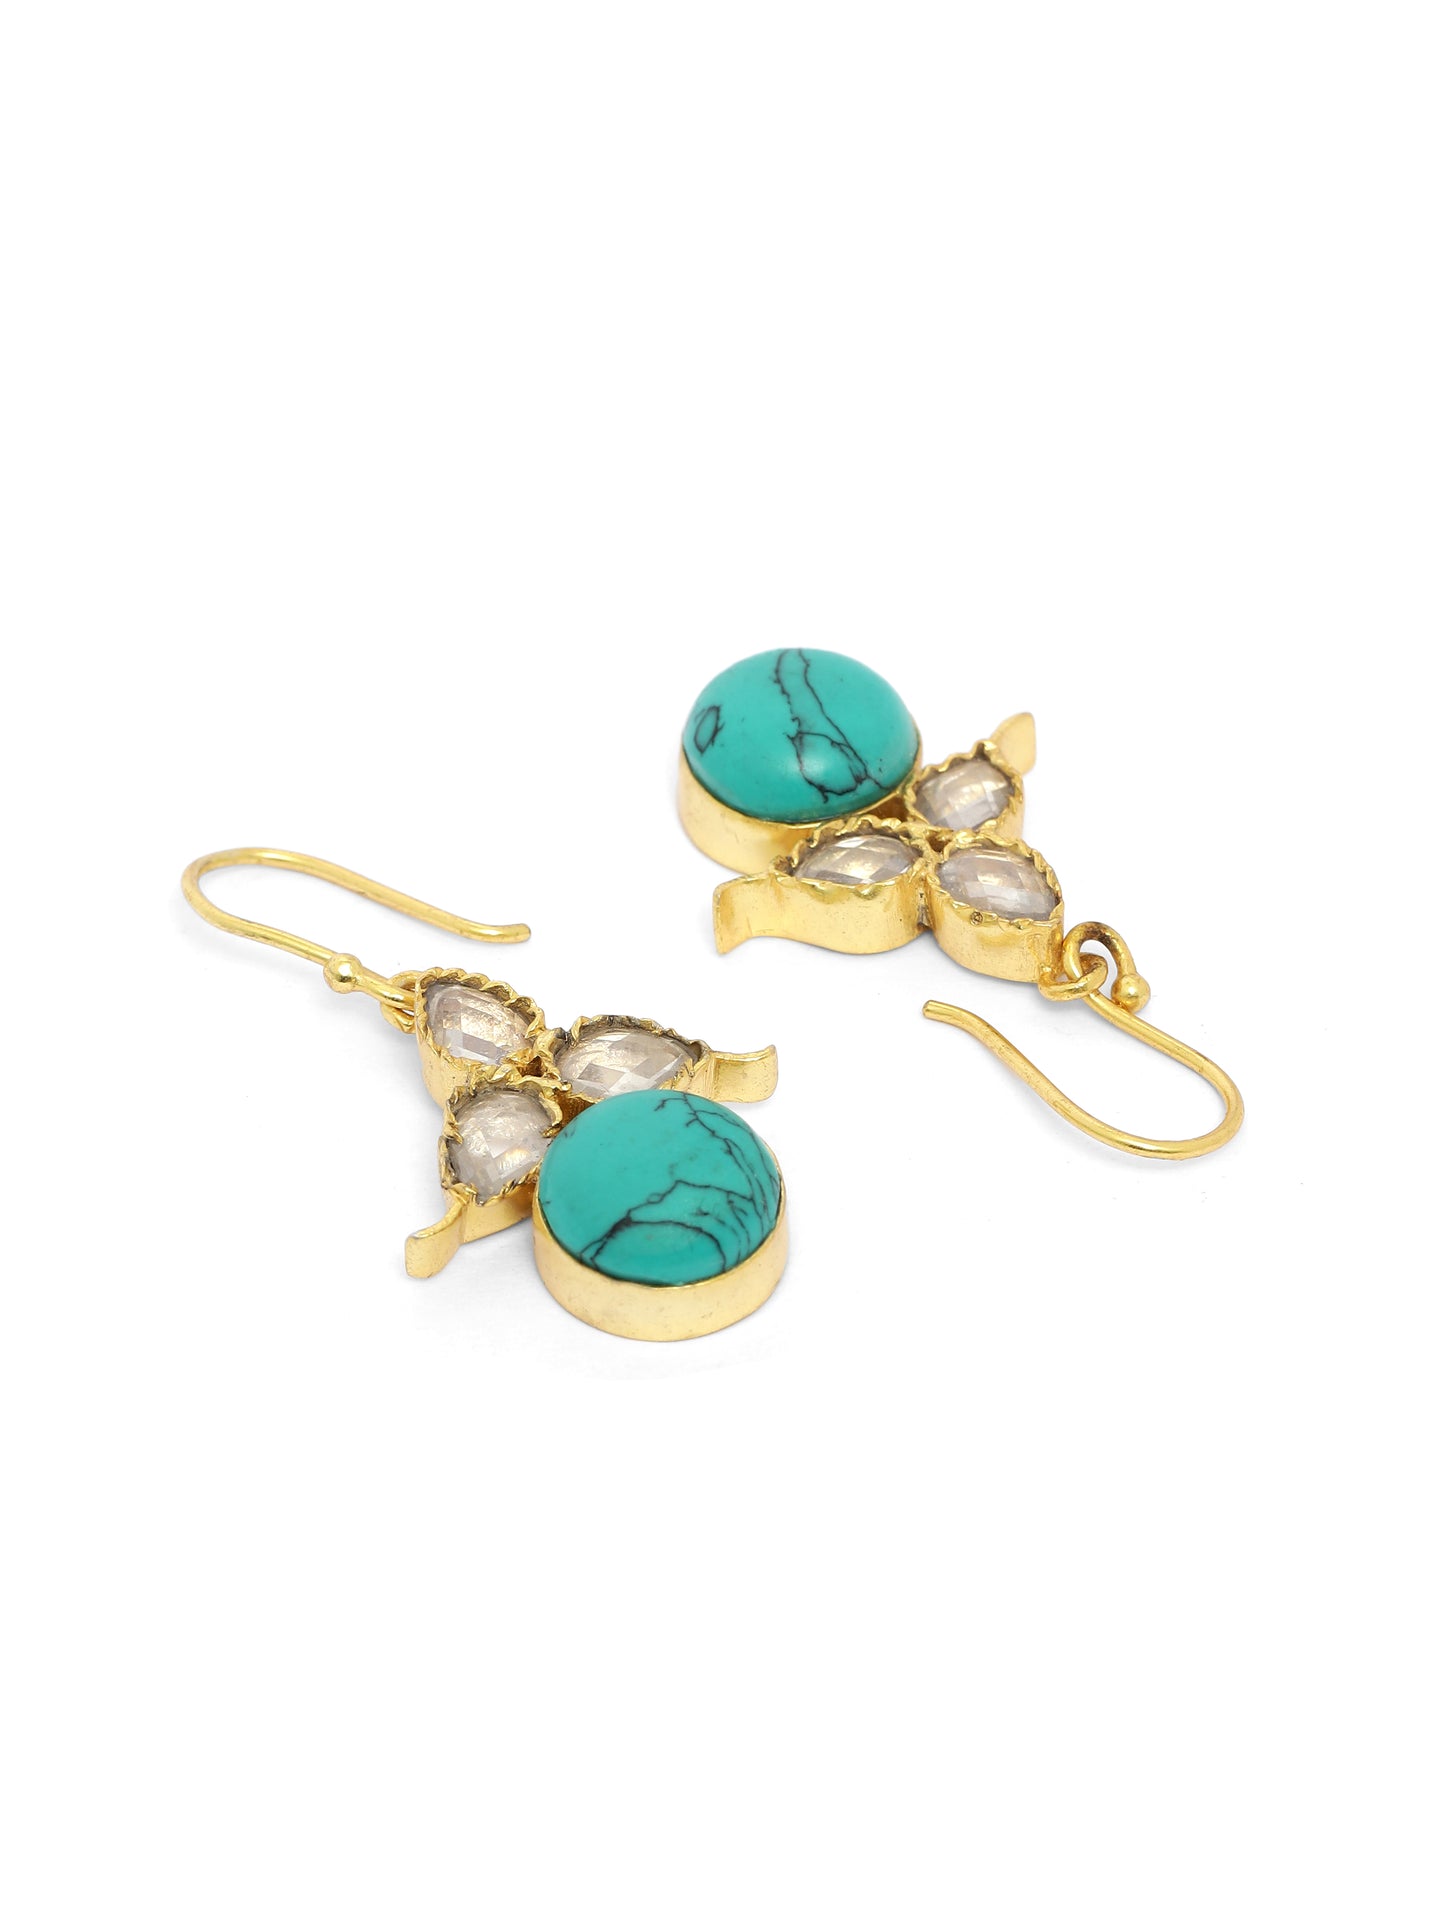 Turquoise Crystal earrings with hook closure